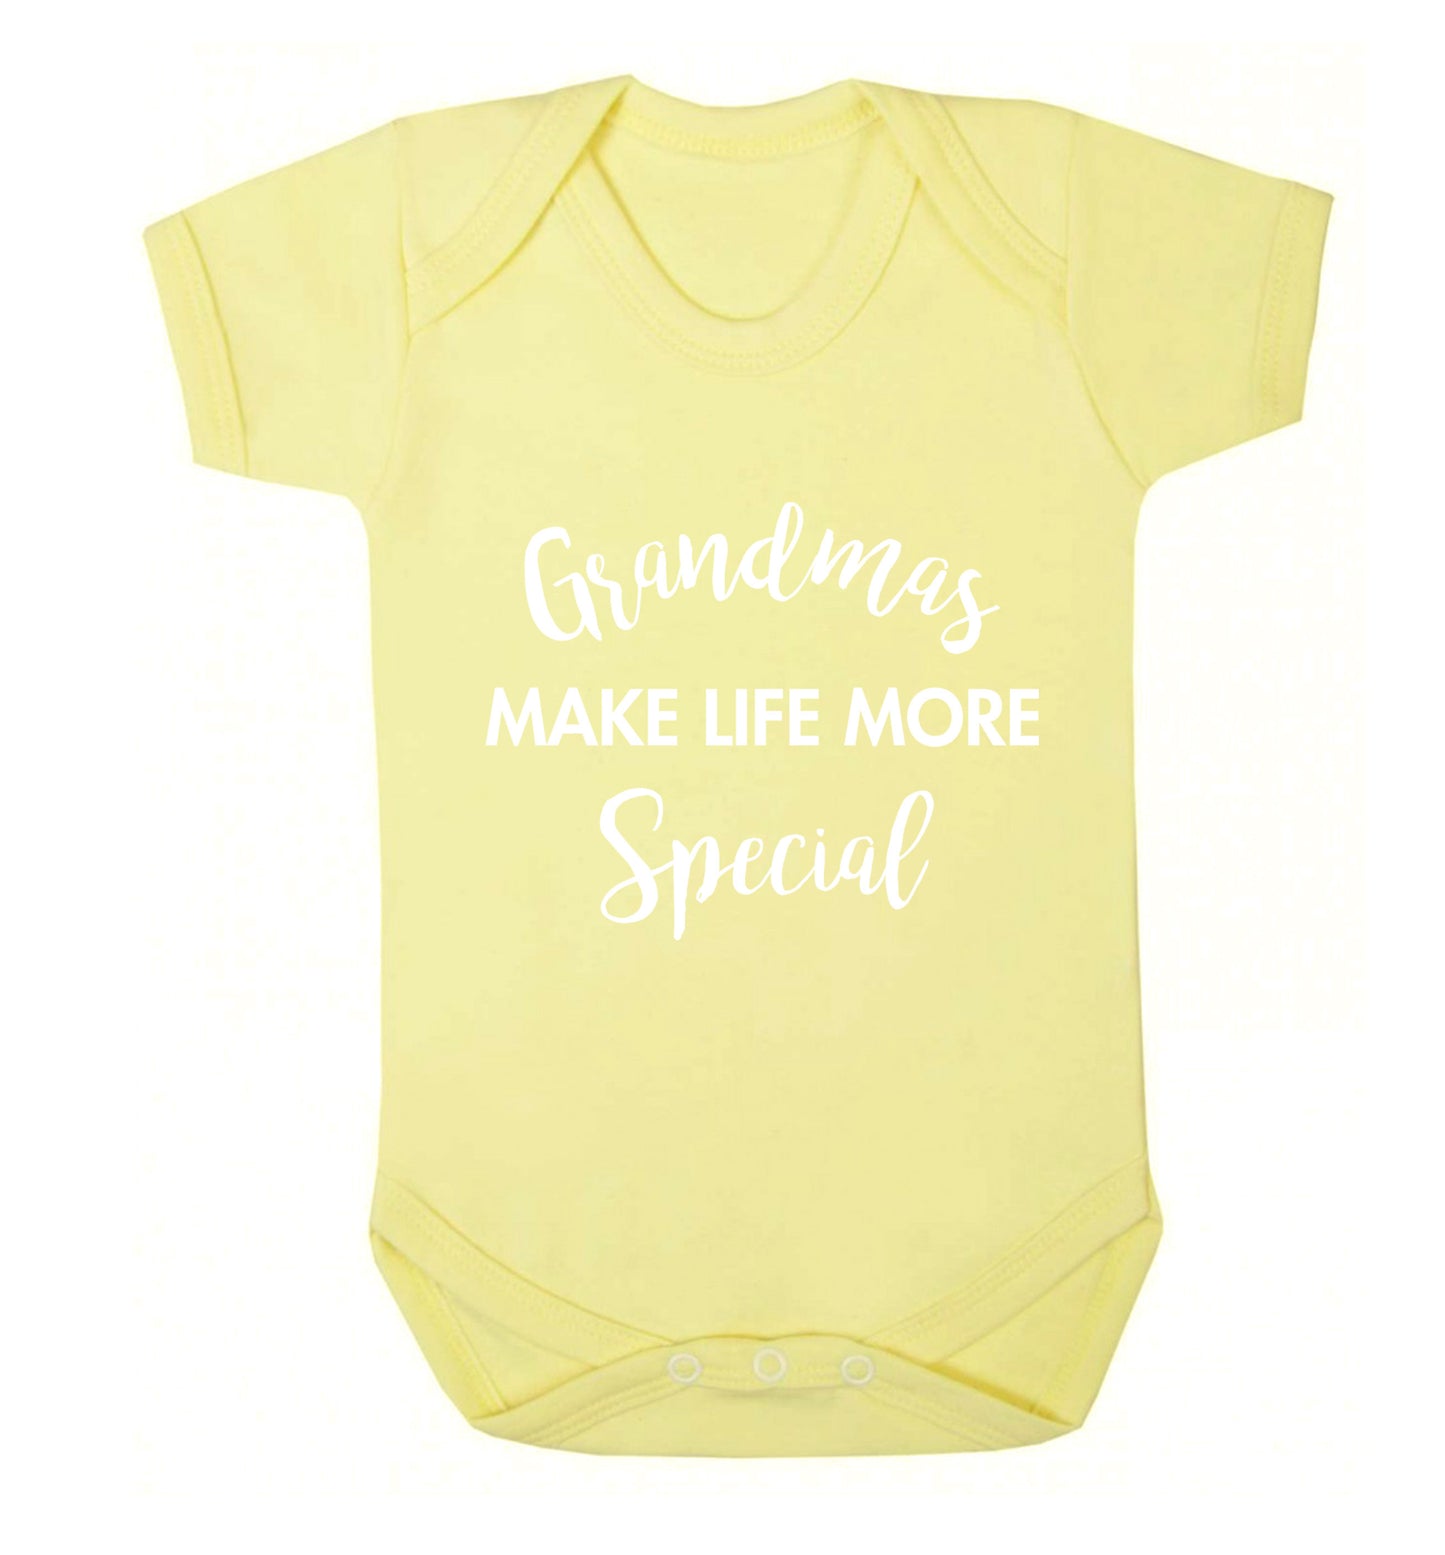 Grandmas make life more special Baby Vest pale yellow 18-24 months